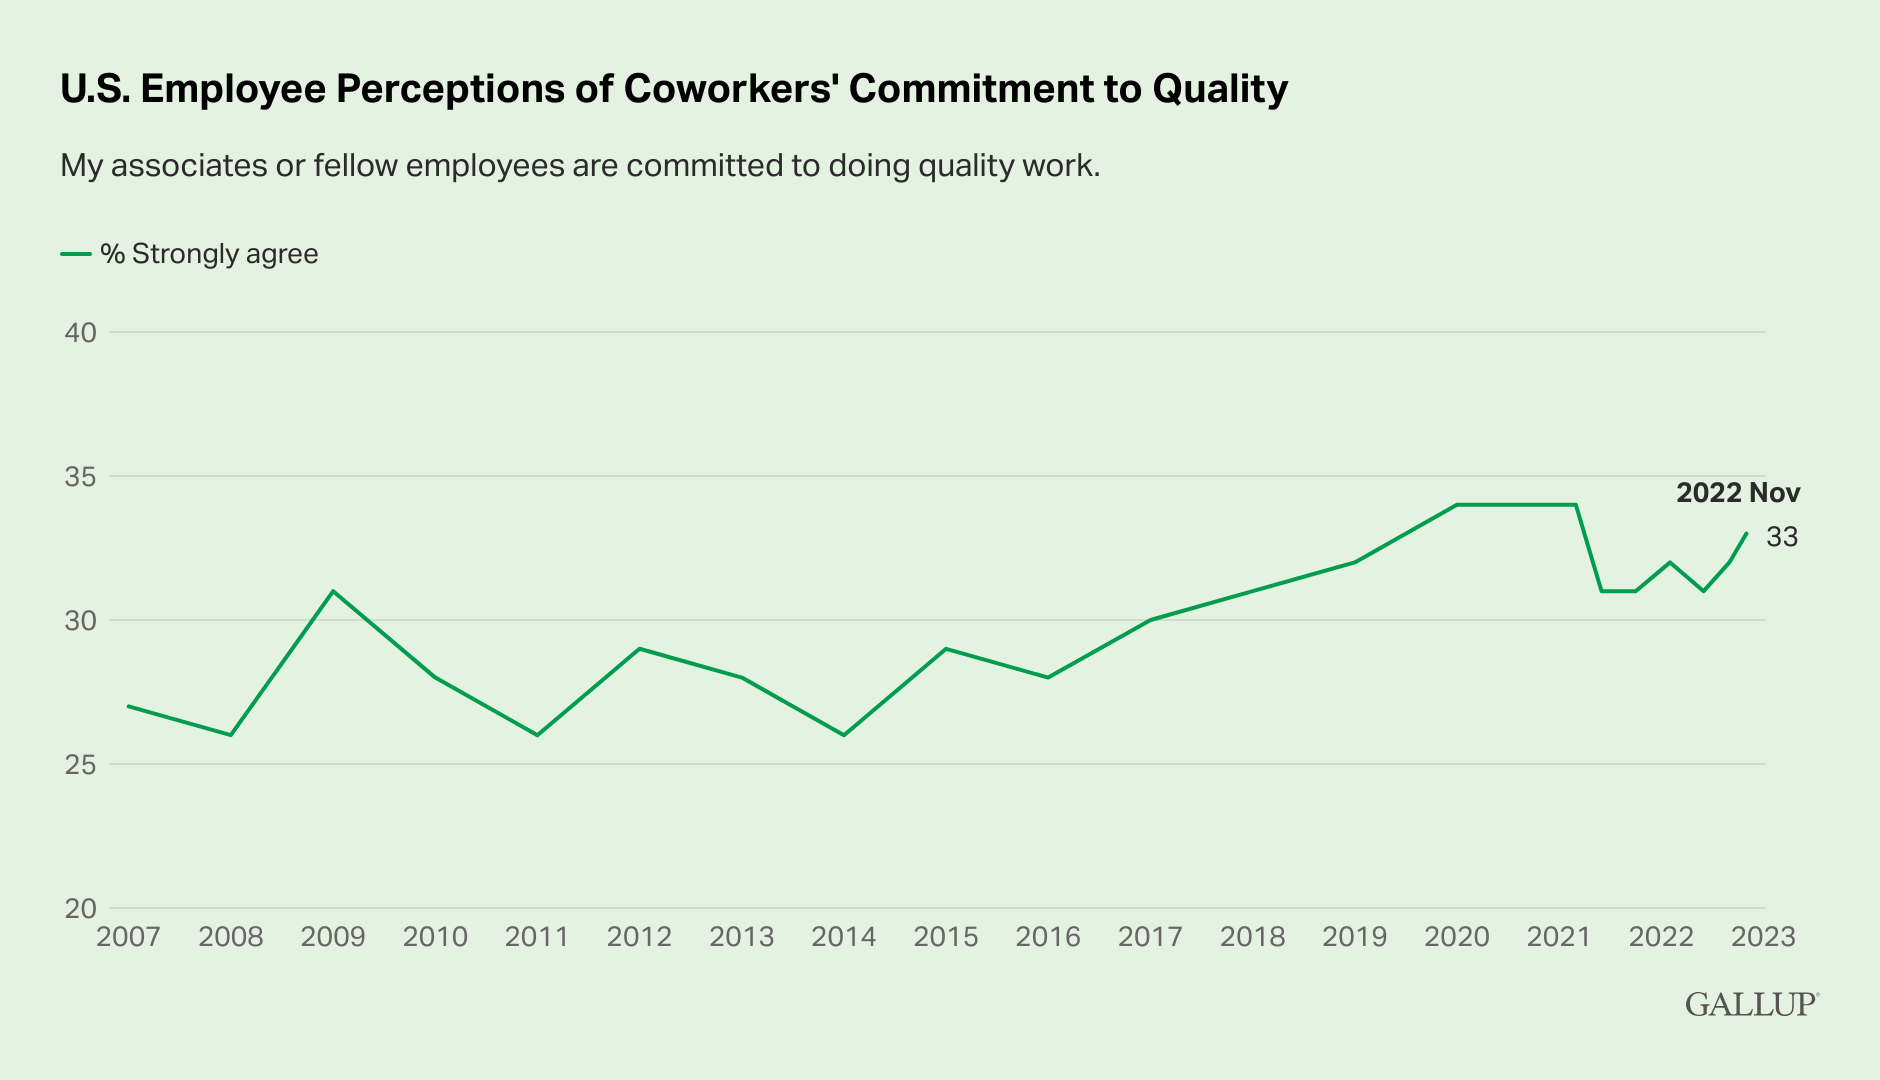 Commitment to Quality Work